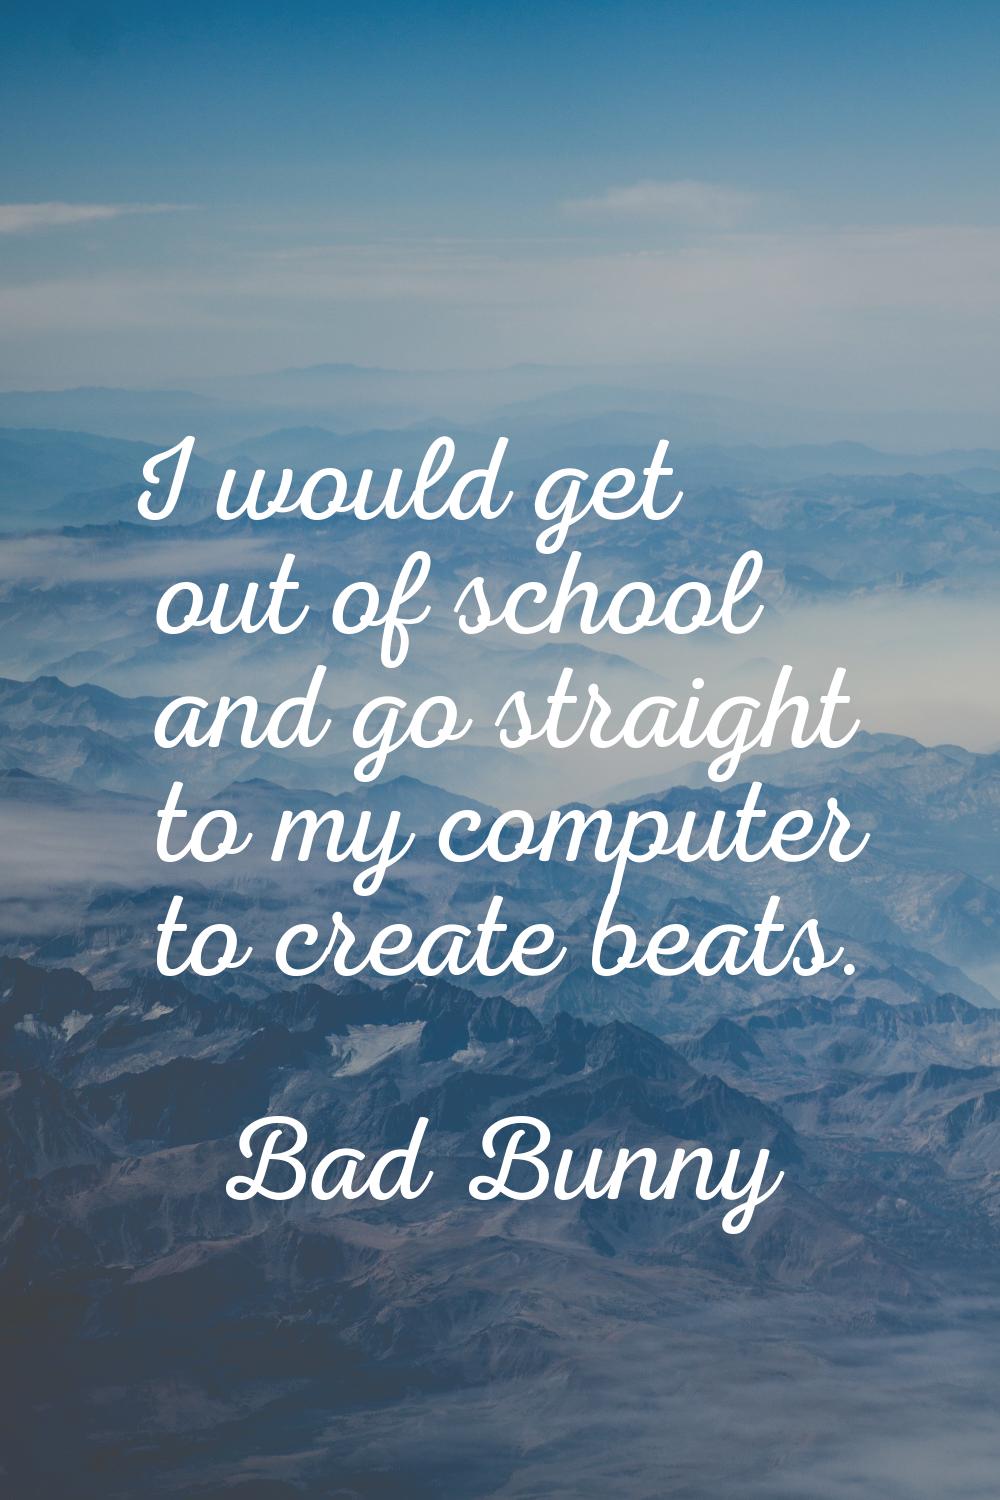 I would get out of school and go straight to my computer to create beats.